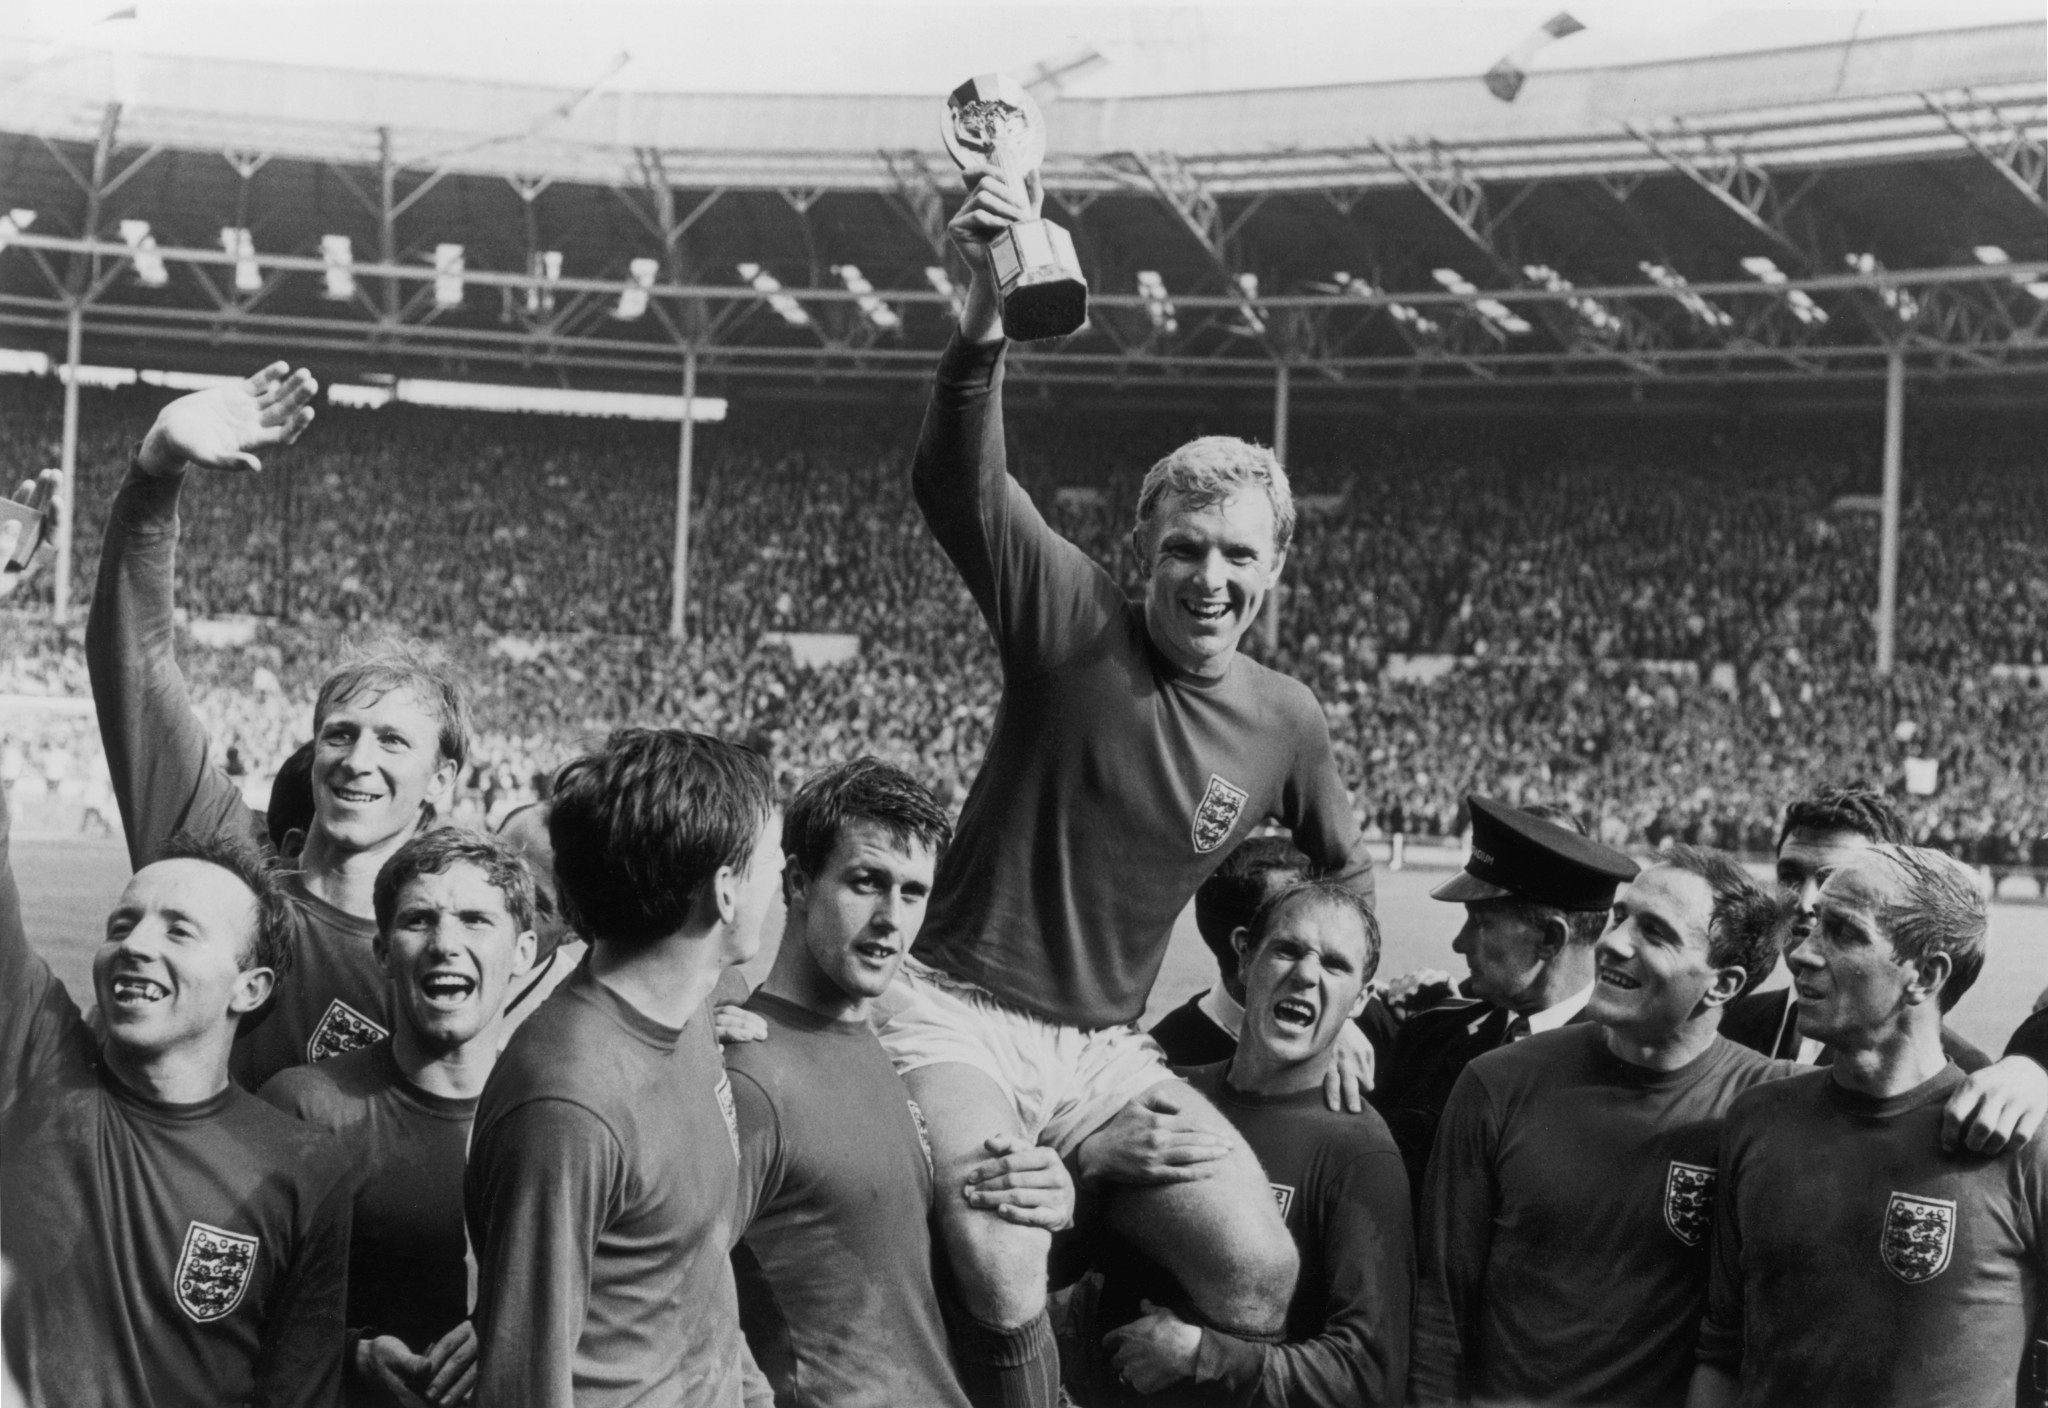 It was a very different time and team when England last won a major football trophy, in 1966 ©Getty Images